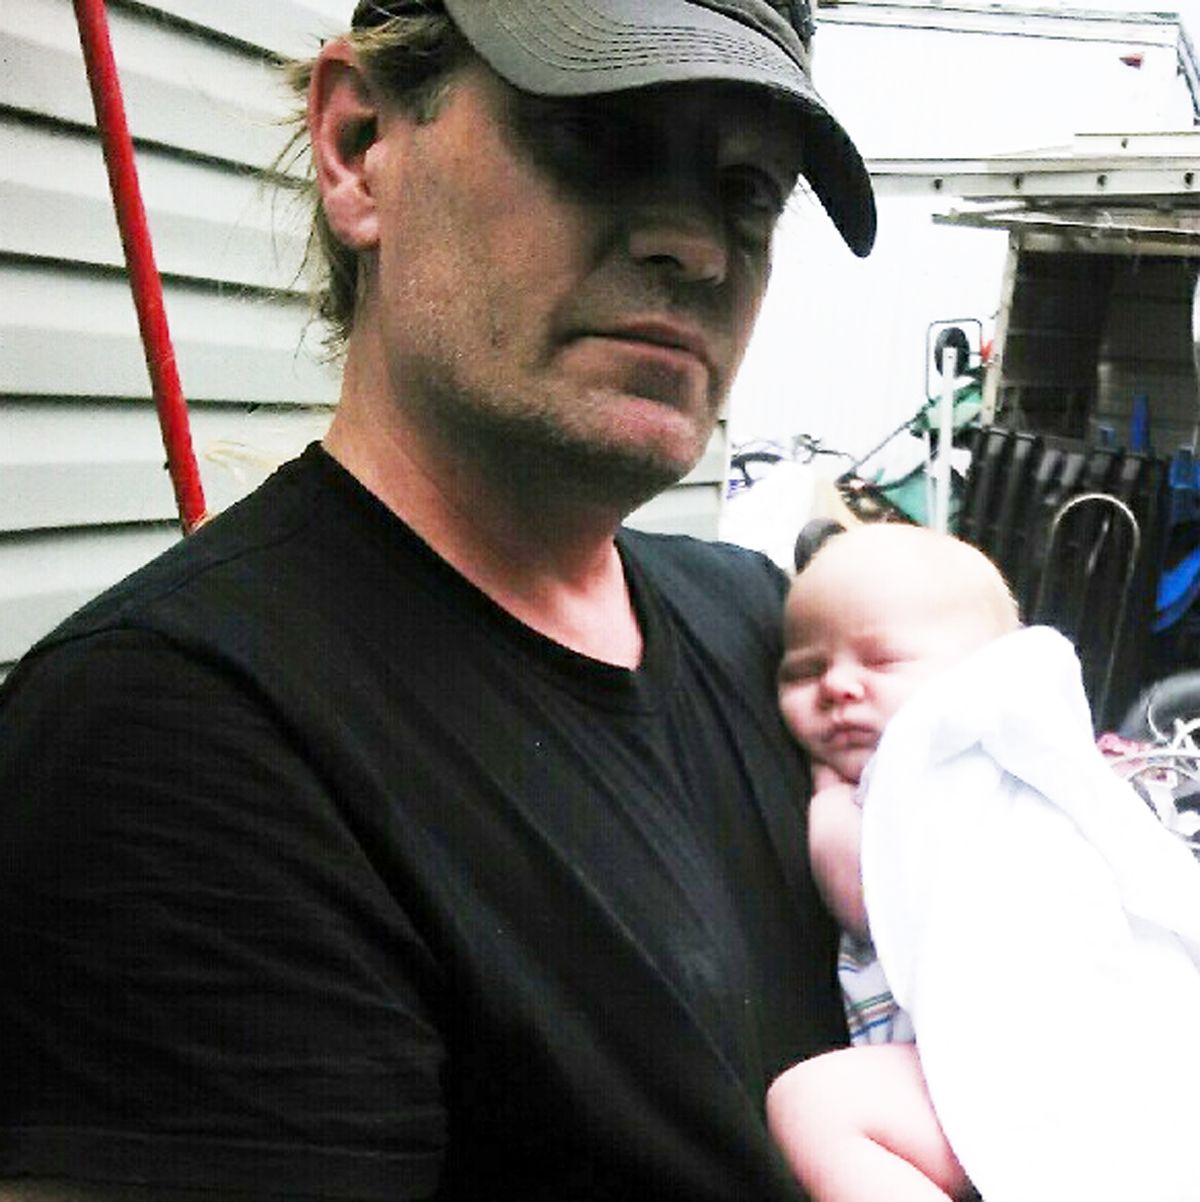 Robert Royer and his new baby are seen in this family photo. Royer was killed by a car Tuesday while biking in Spokane Valley. (Family)